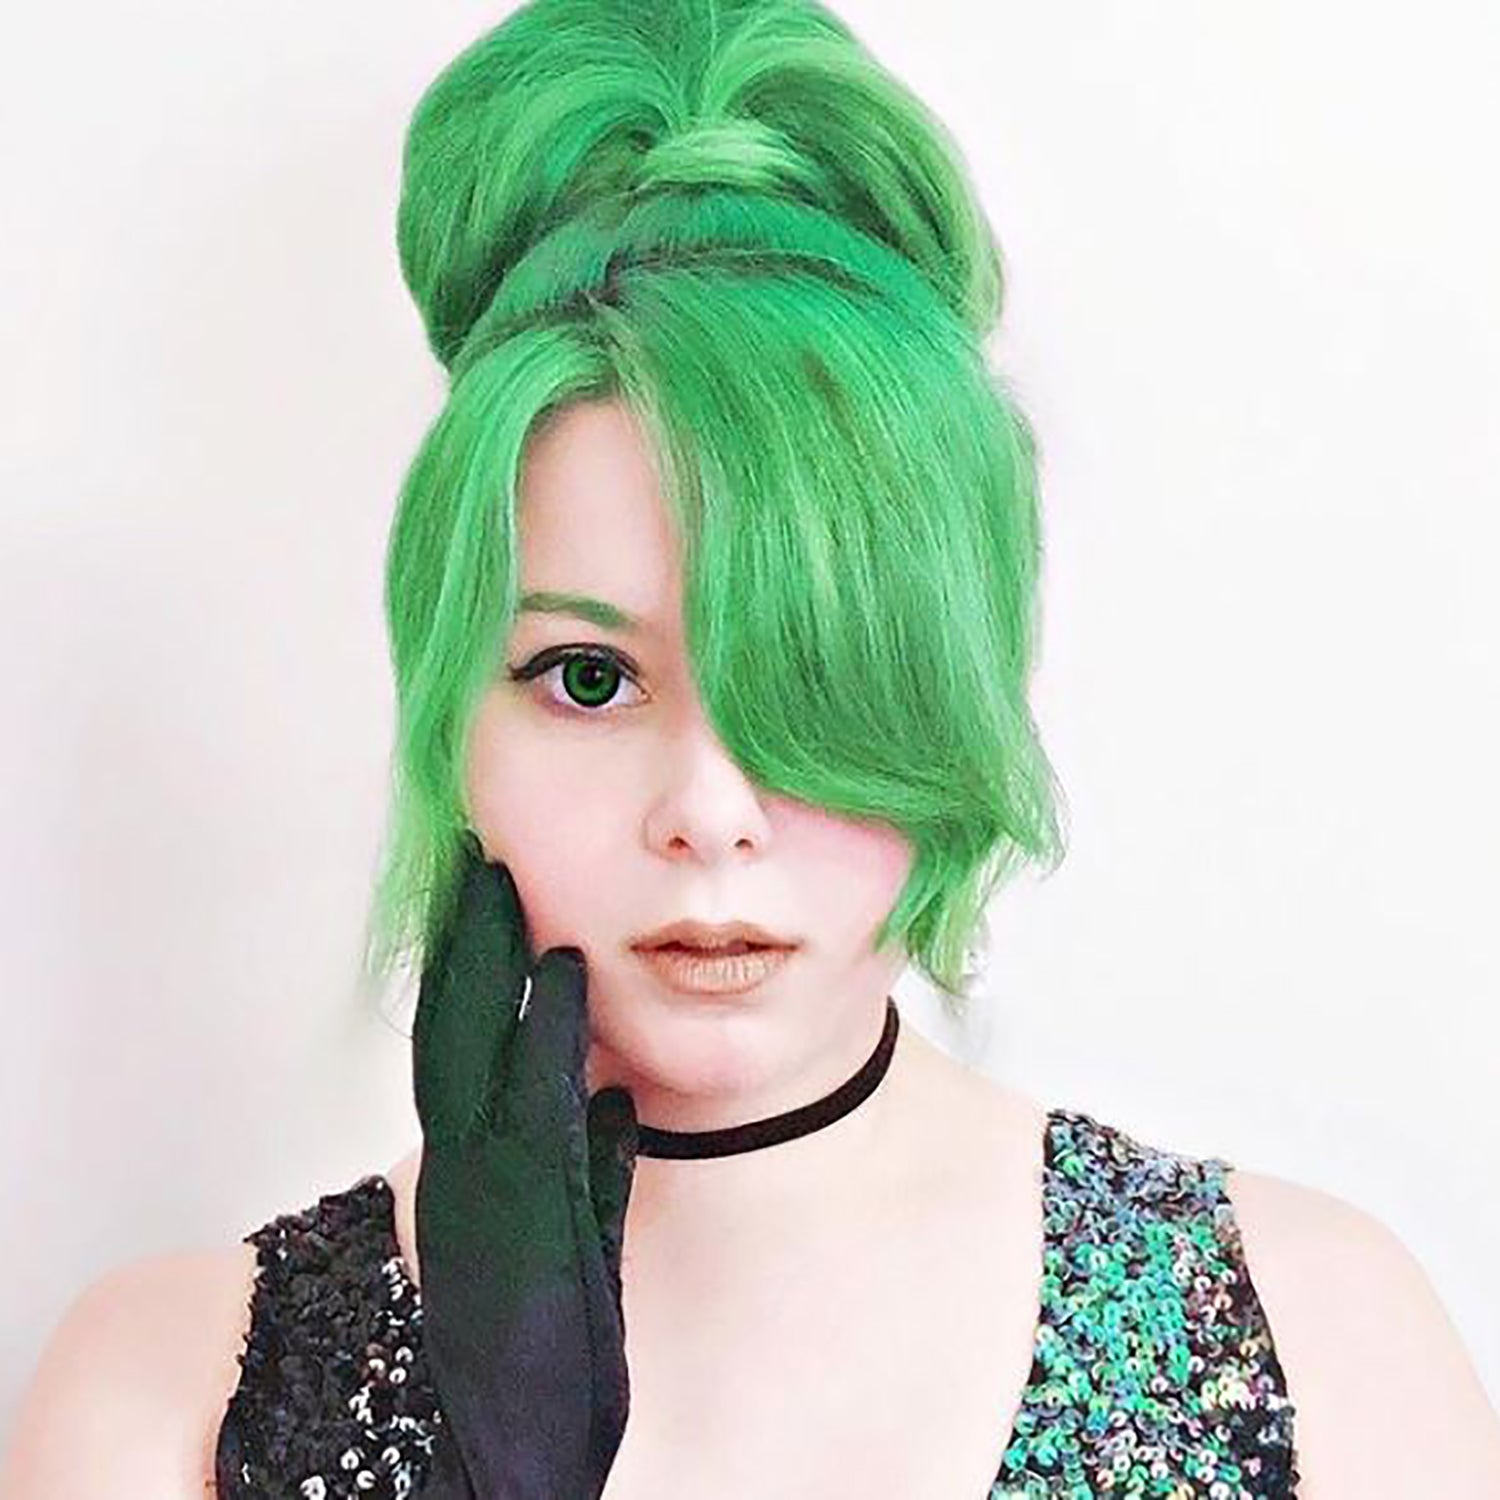 person with bright green, pre-lightened hair in a high ponytail with bangs wearing black gloves and sequin top